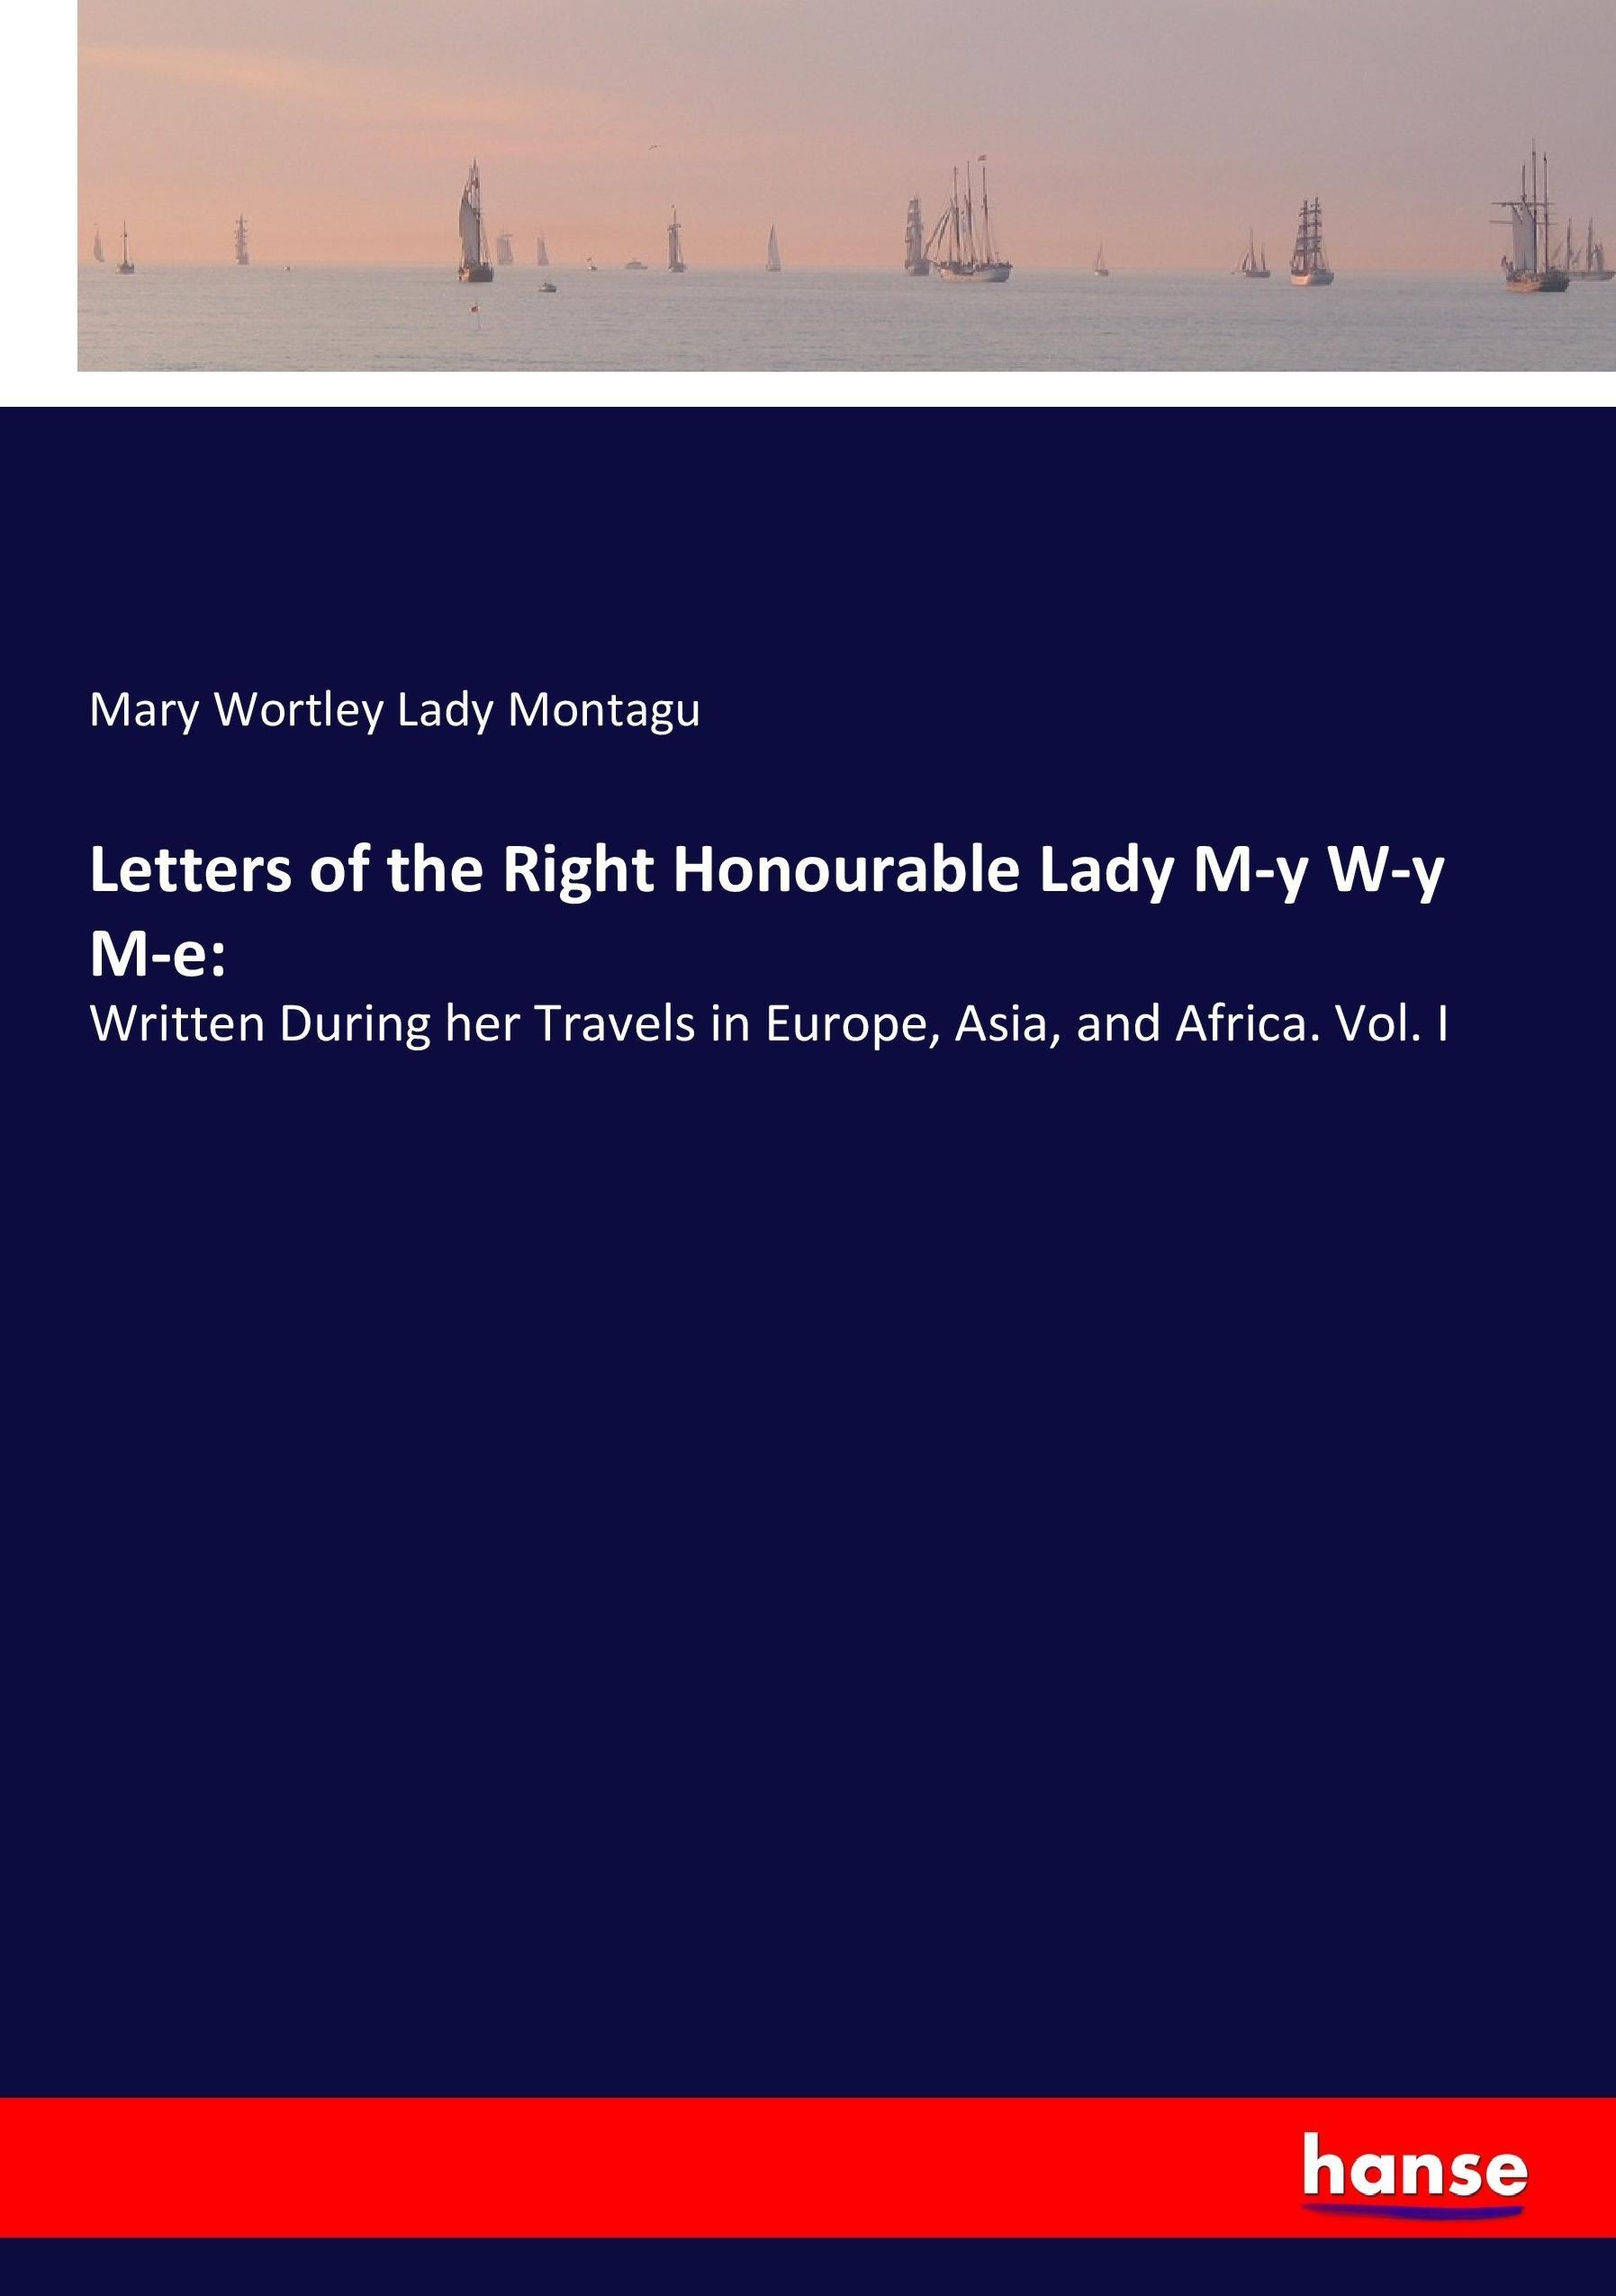 Letters of the Right Honourable Lady M-y W-y M-e - Montagu, Mary Wortley